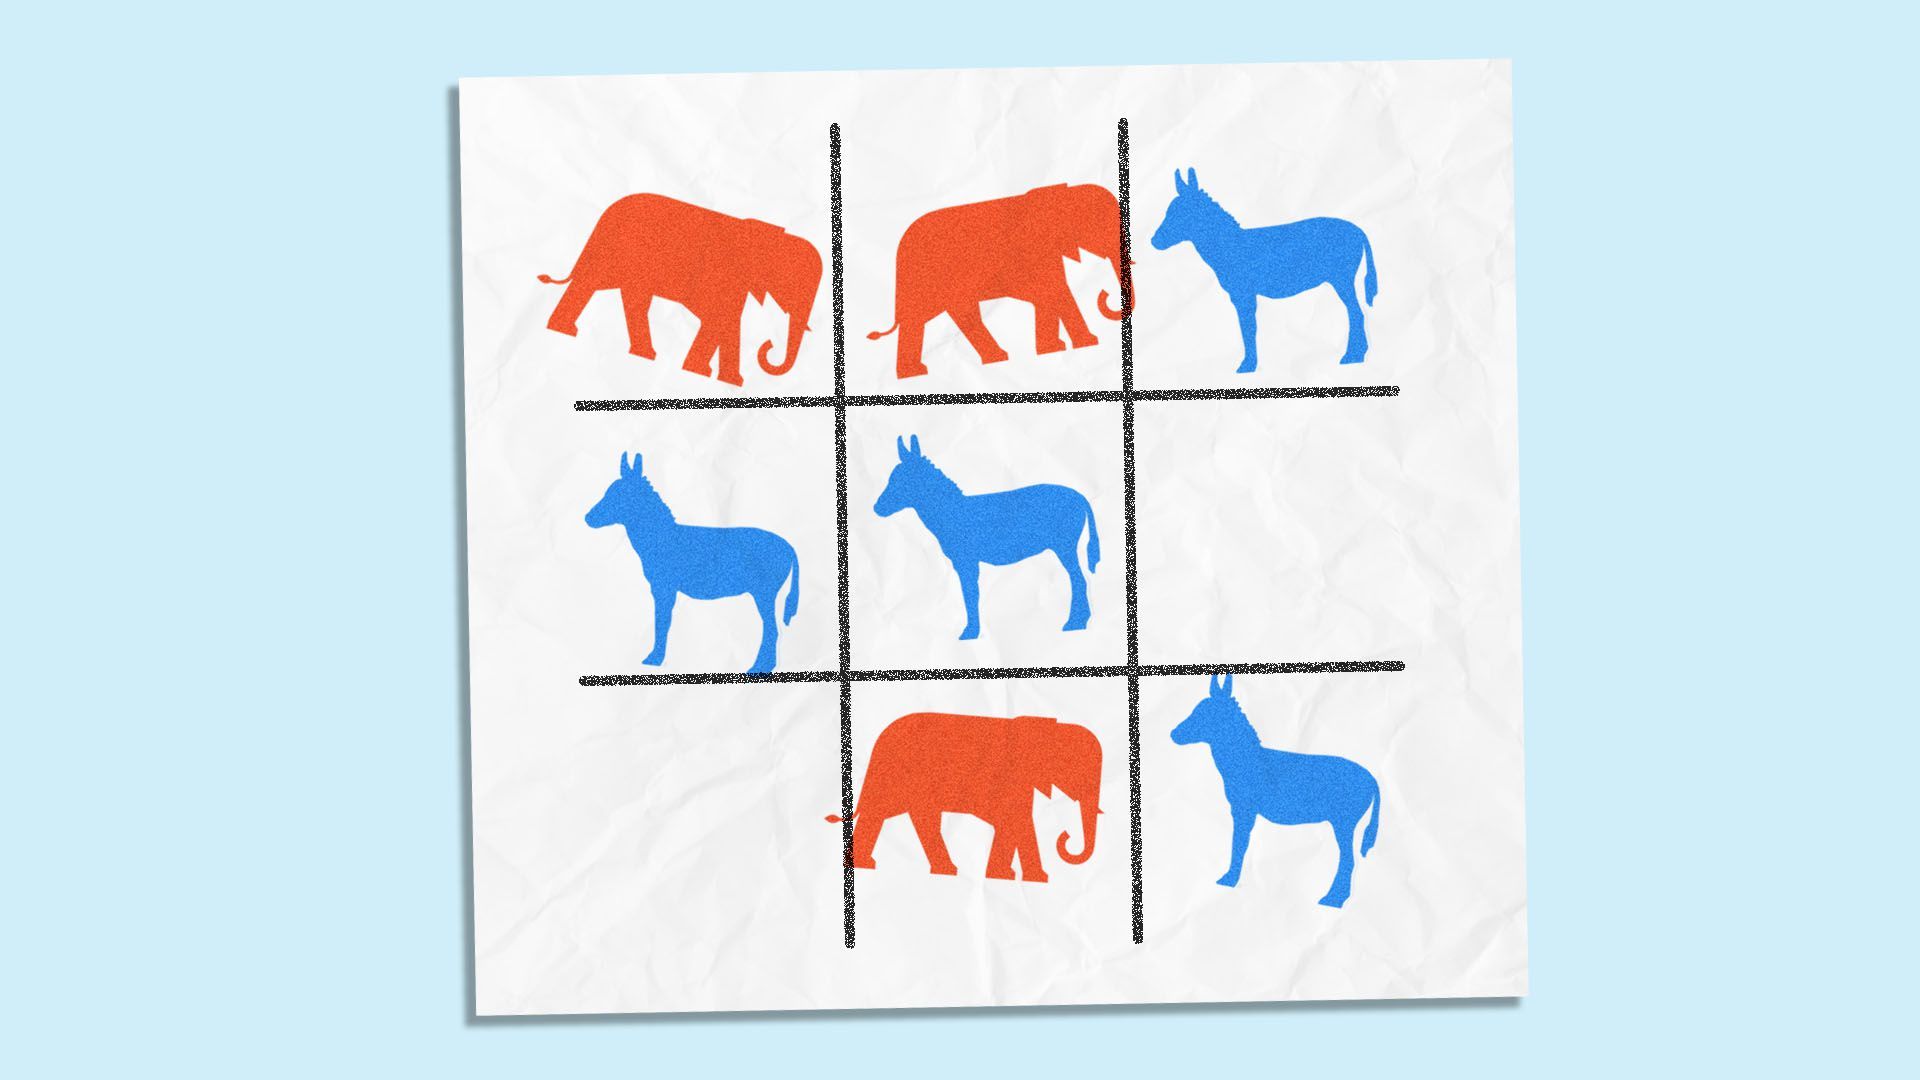 Illustration of a tic-tac-toe game with elephants and donkeys.